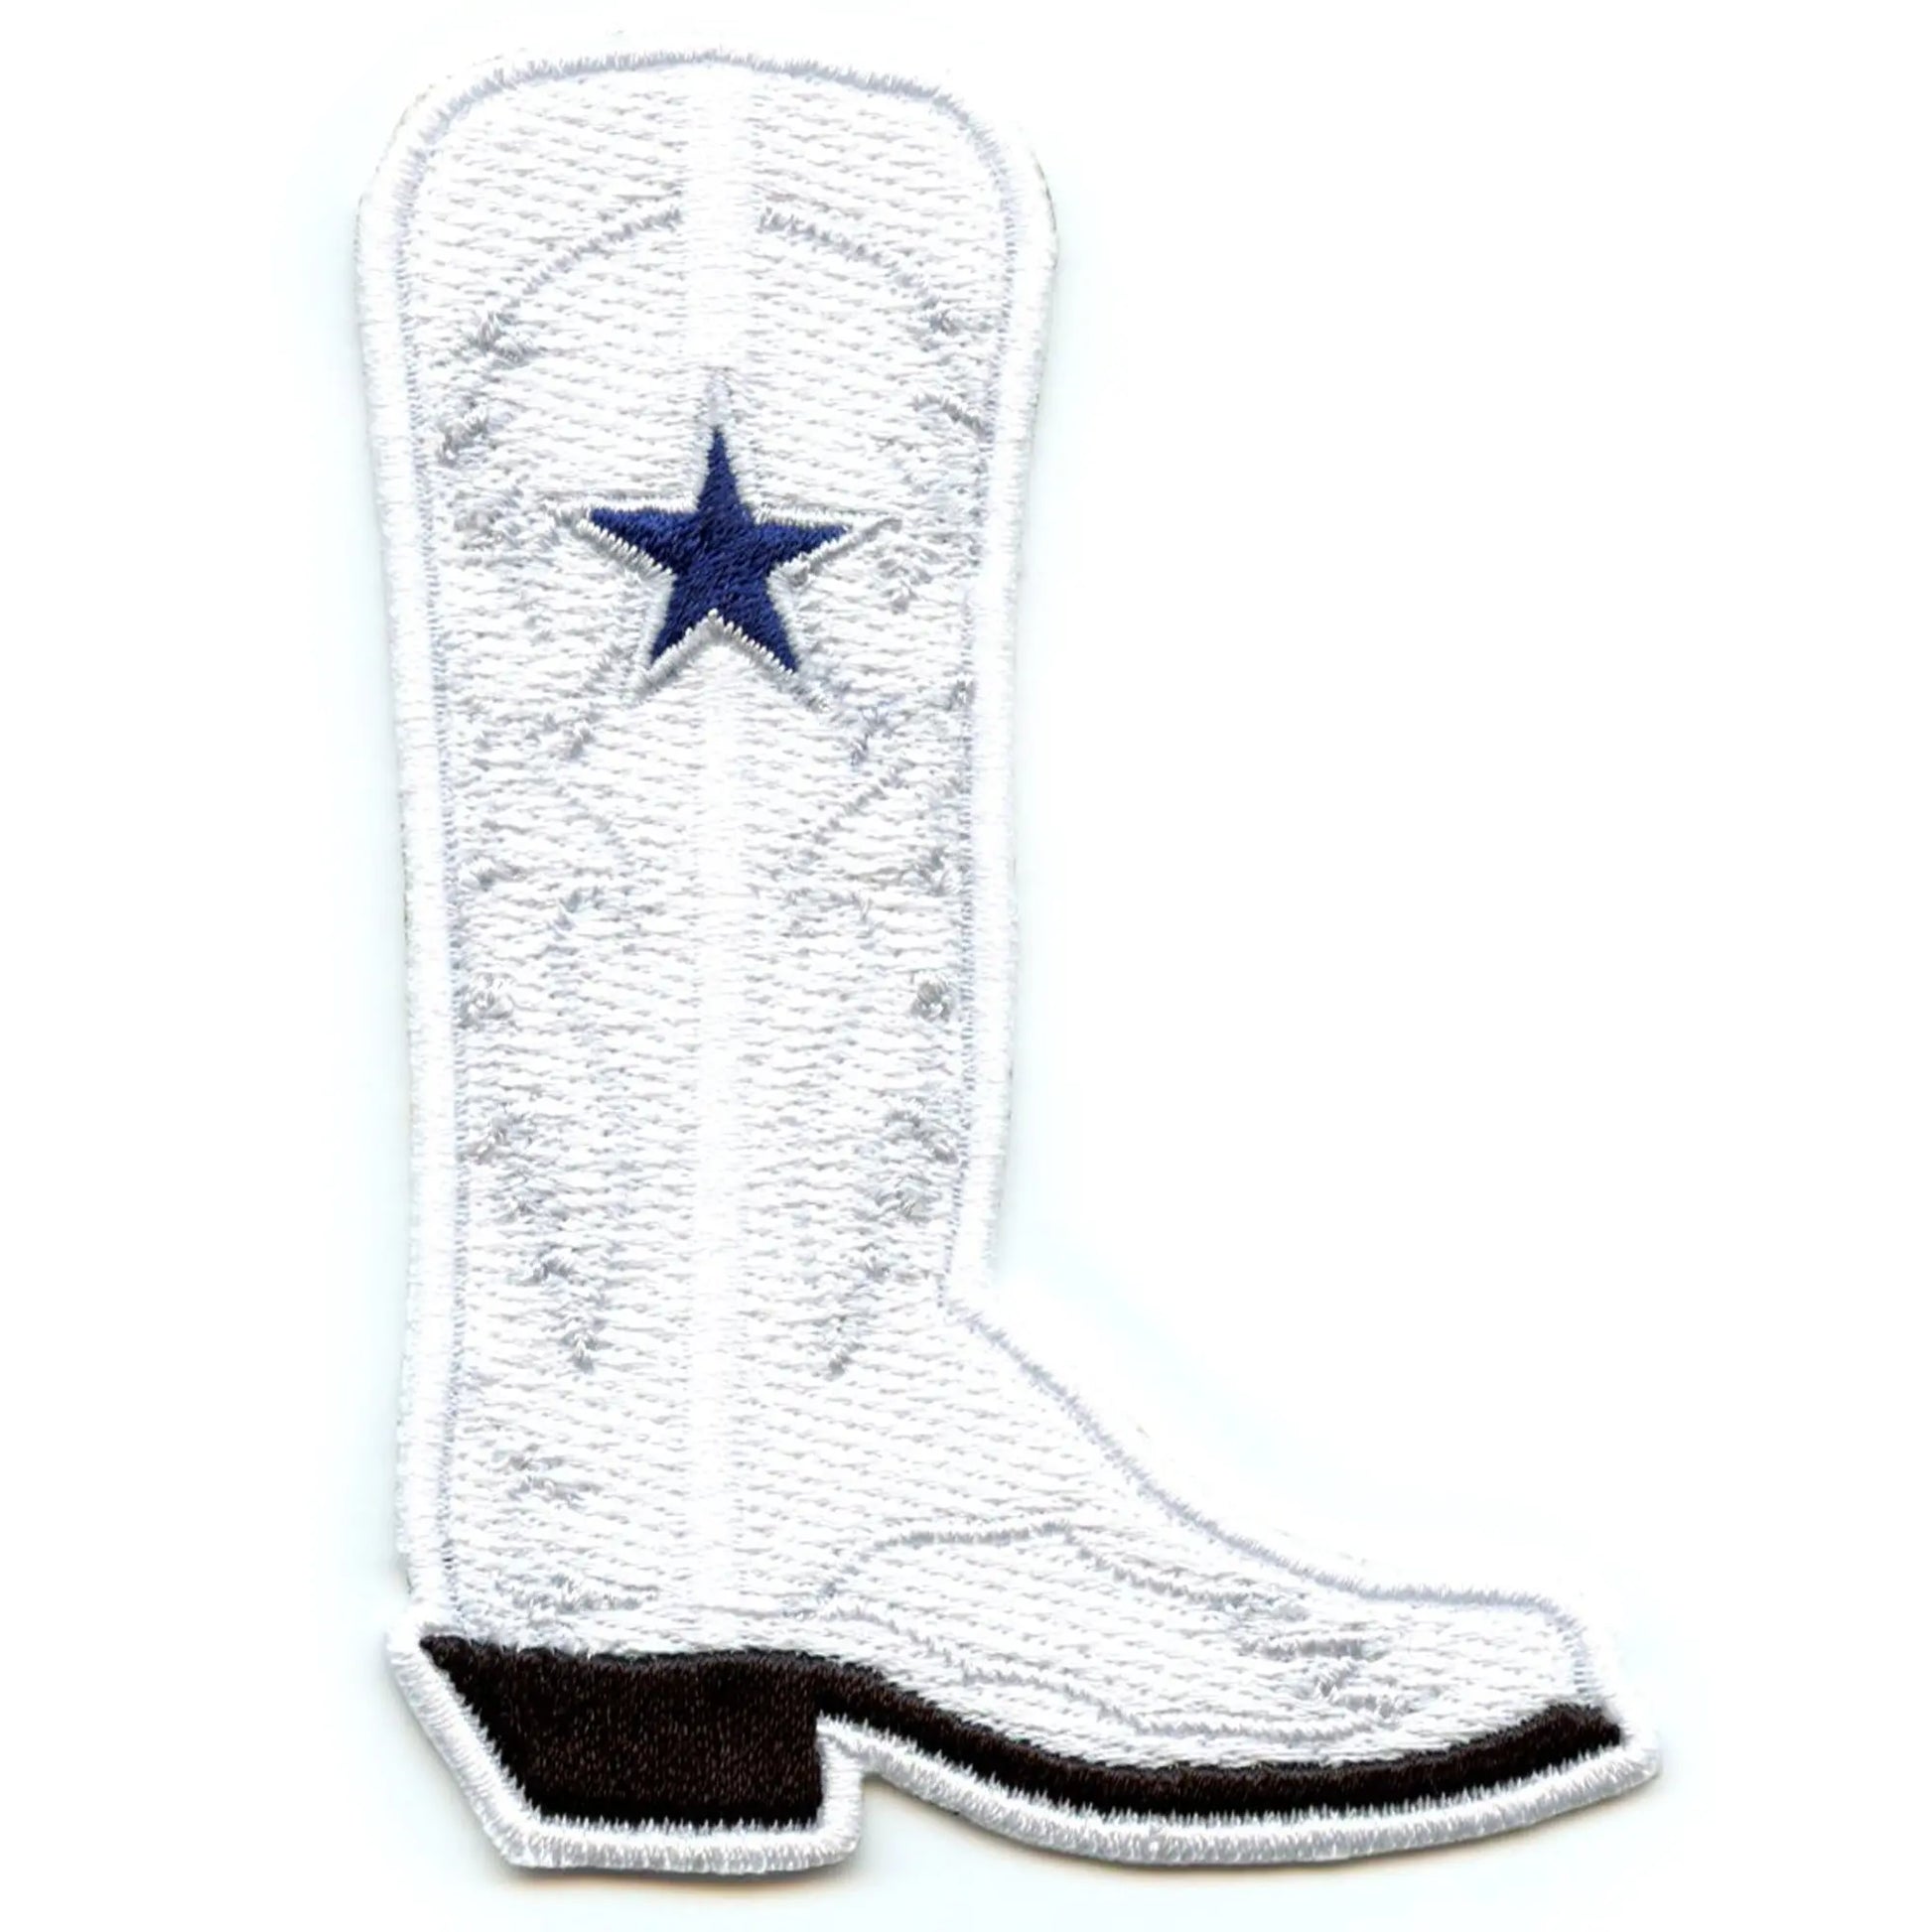 DALLAS COWBOYS IRON ON PATCH 2